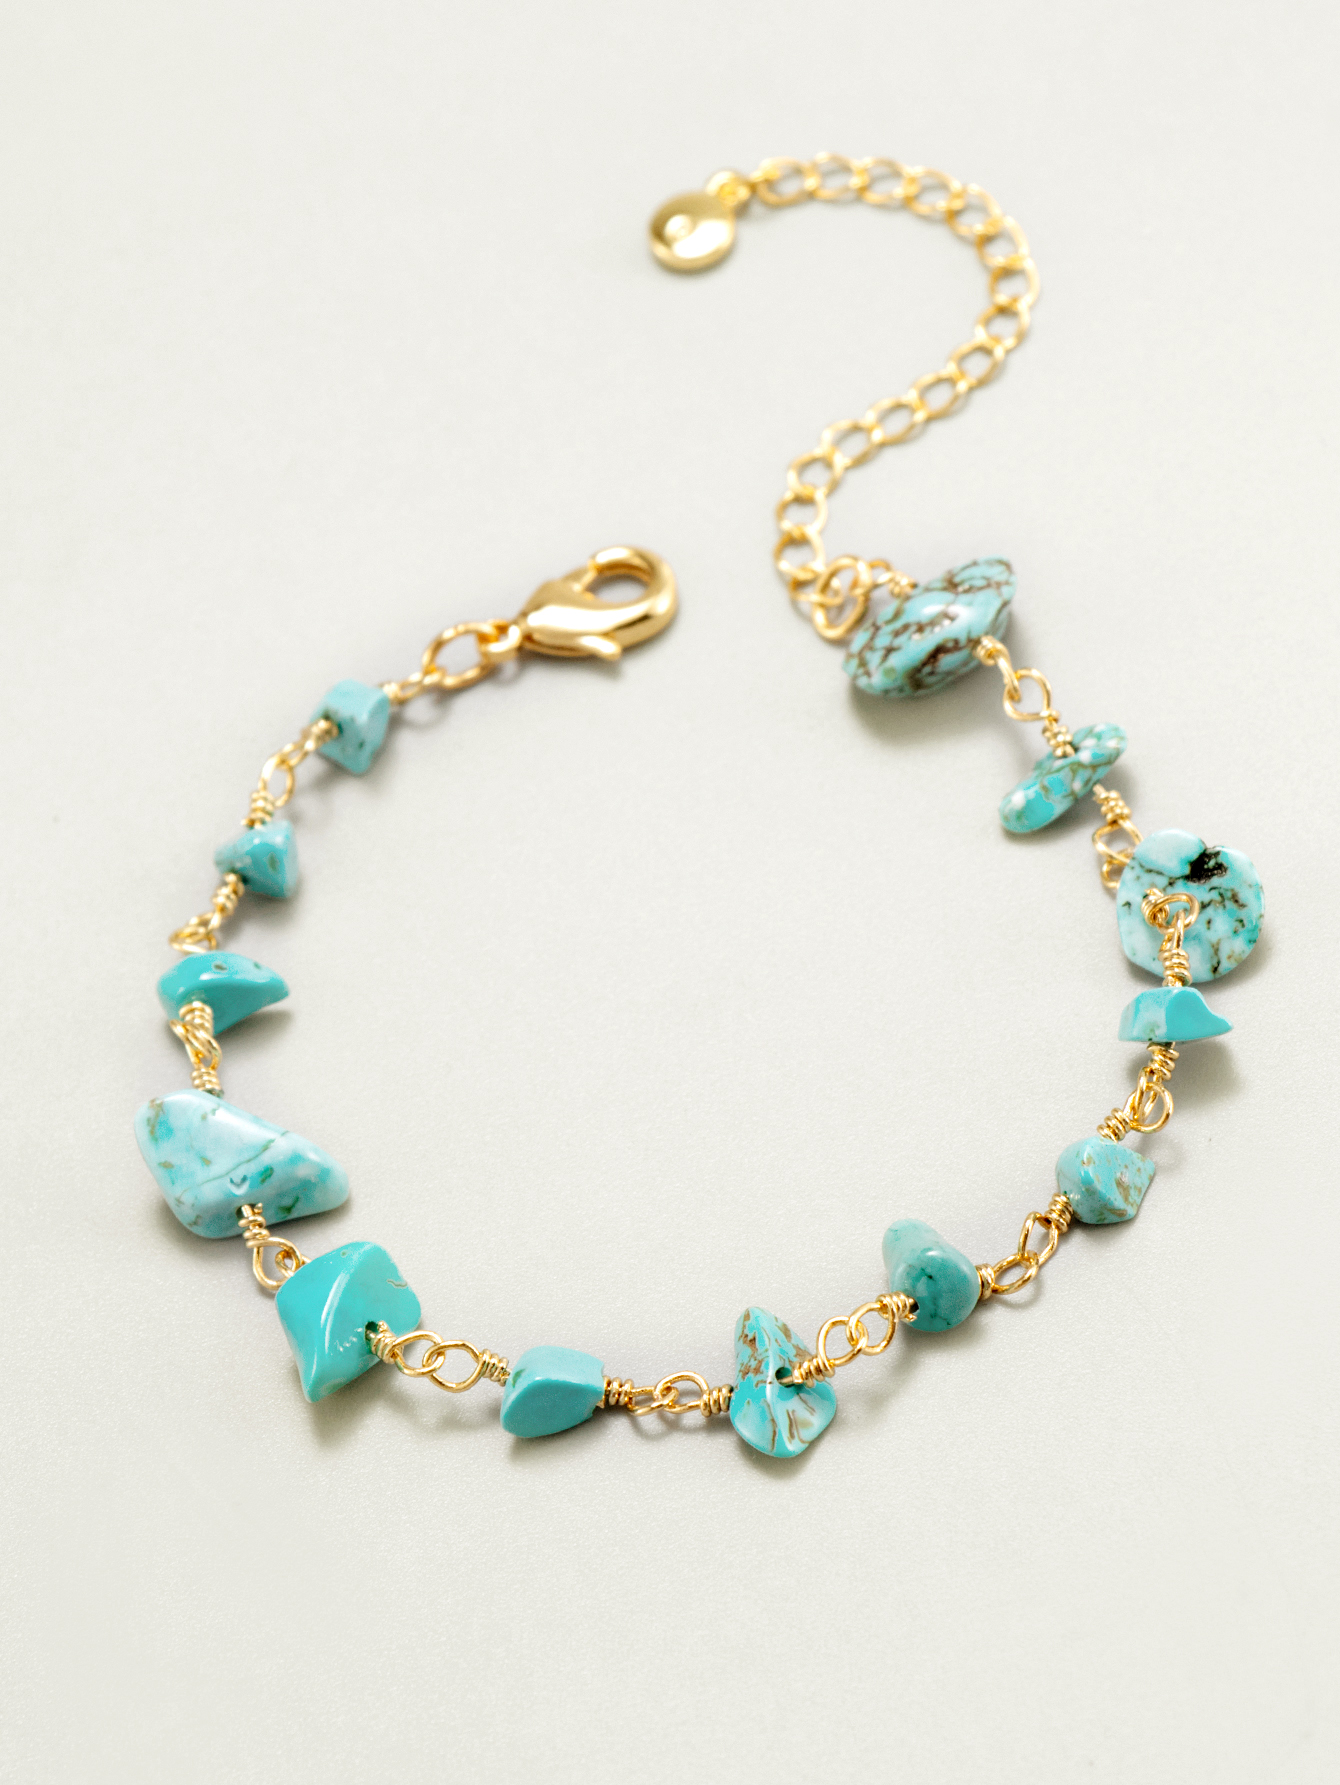 Boho Turquoise Beaded Chain Bracelet from azone supplier